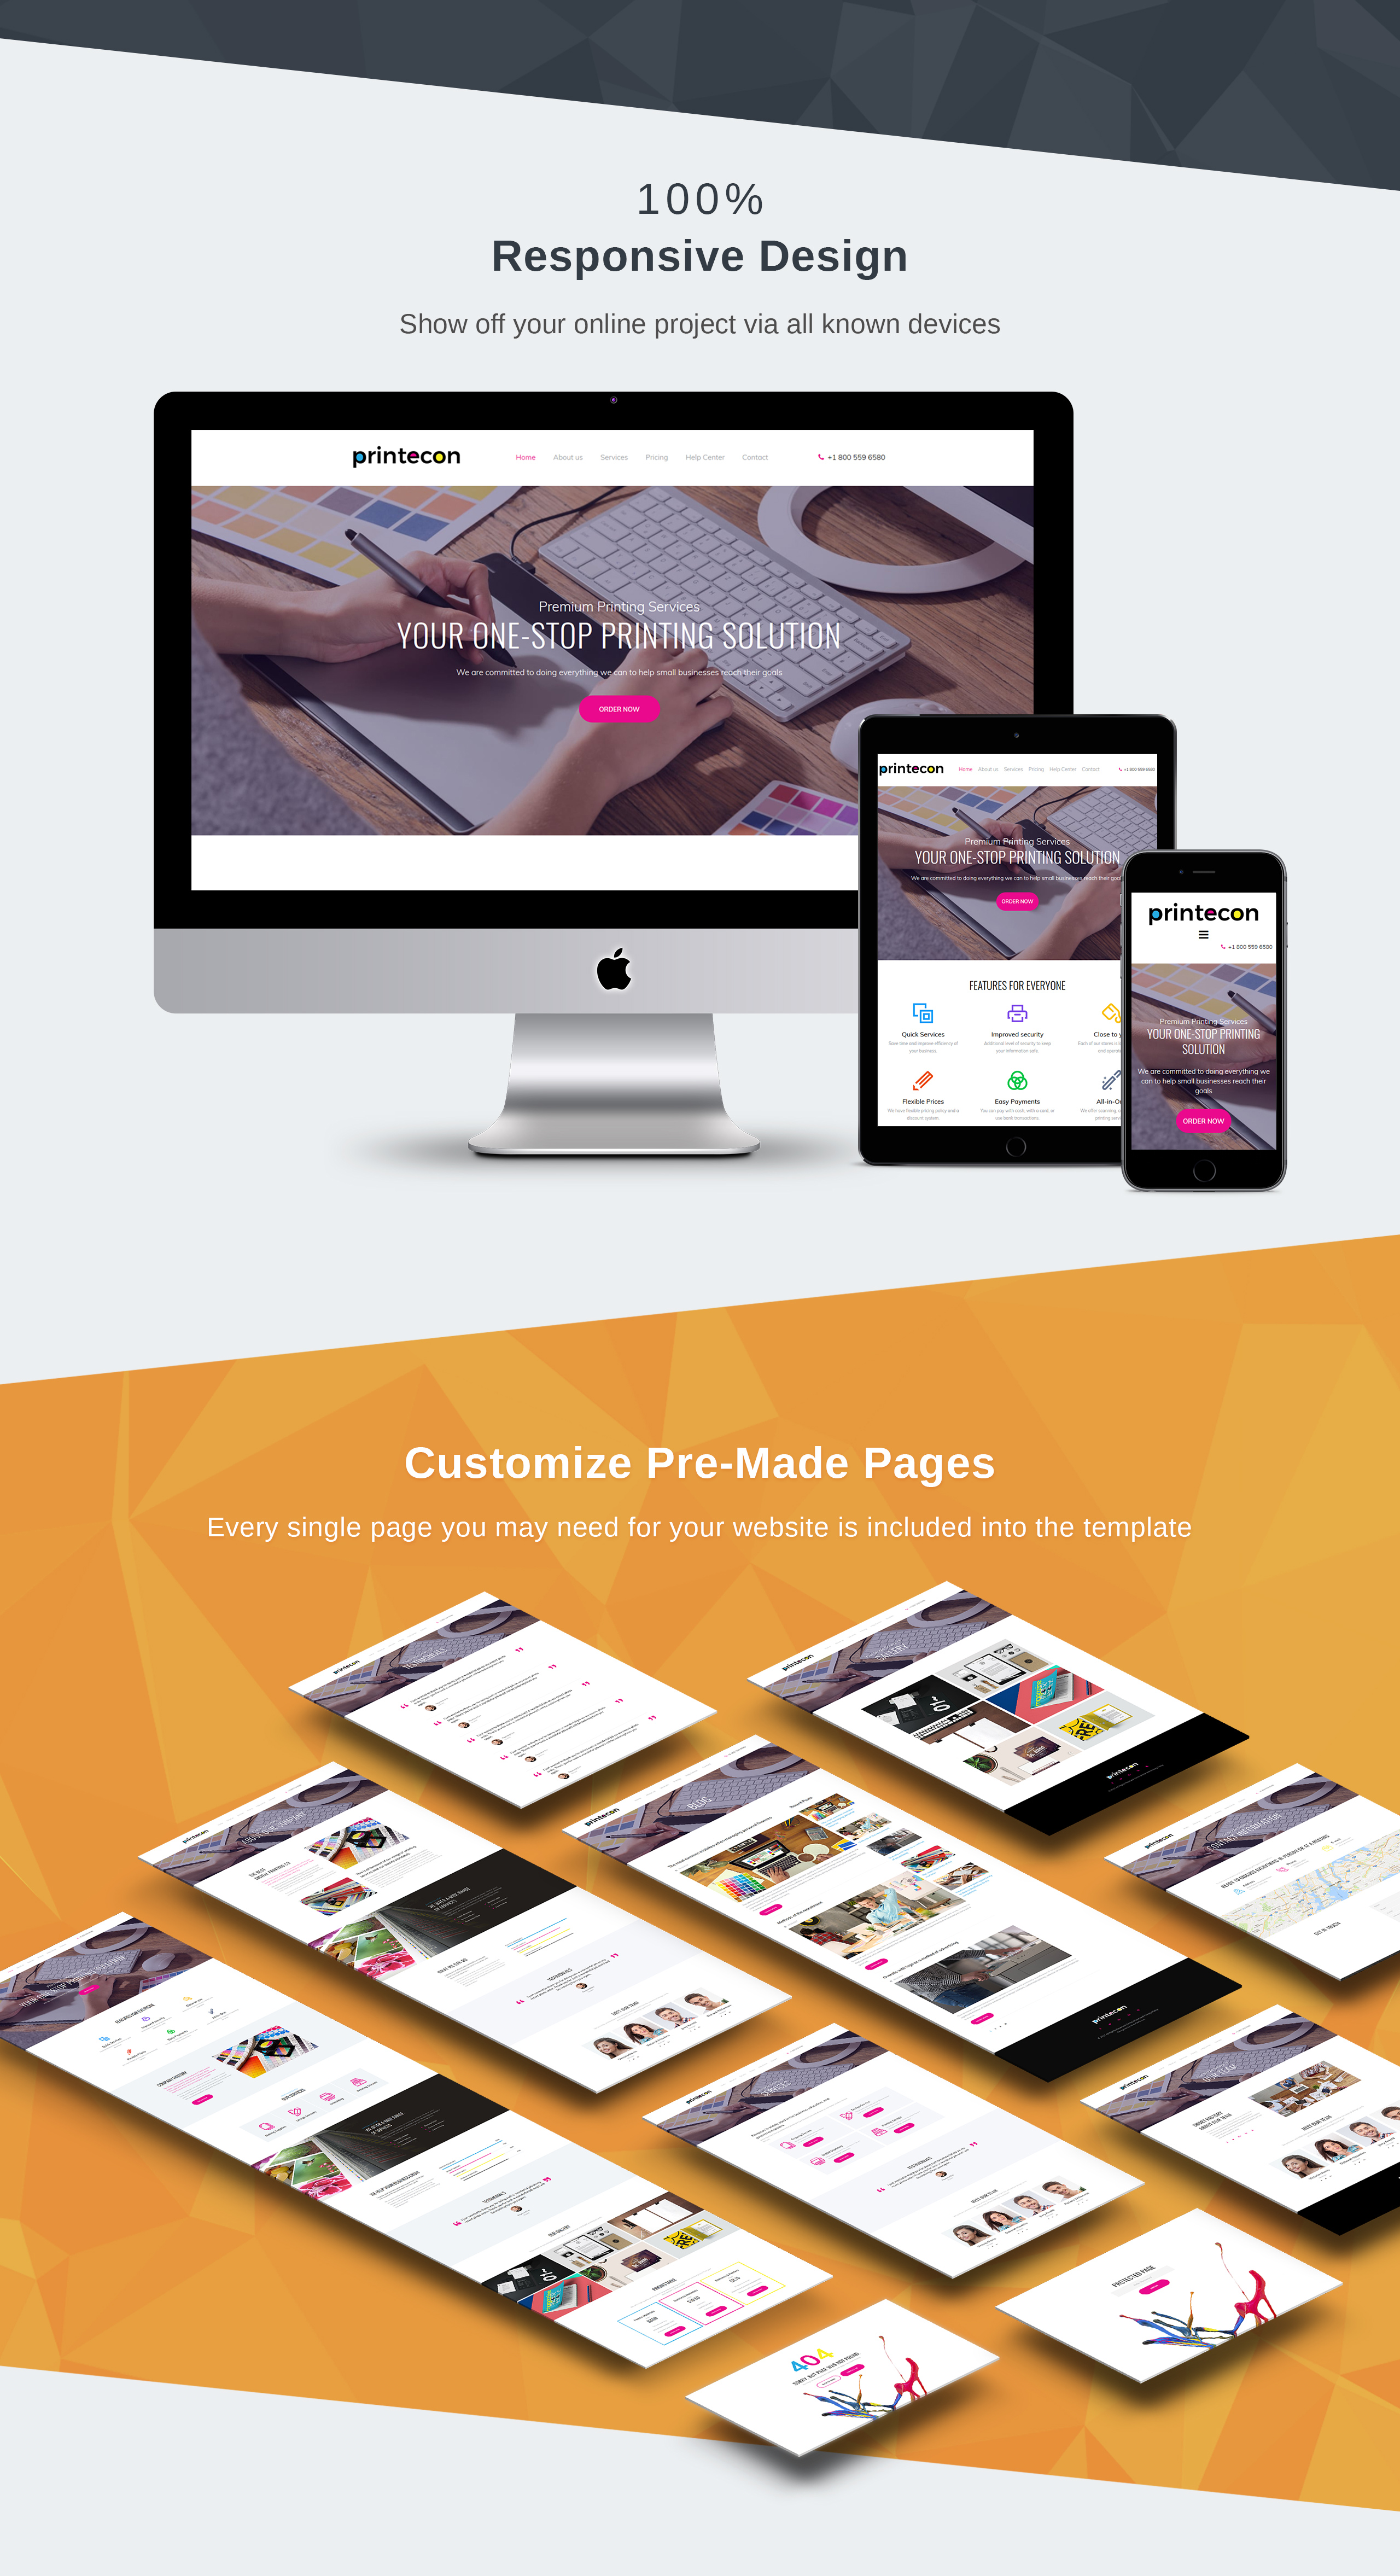 printing-company-website-template-for-print-services-motocms